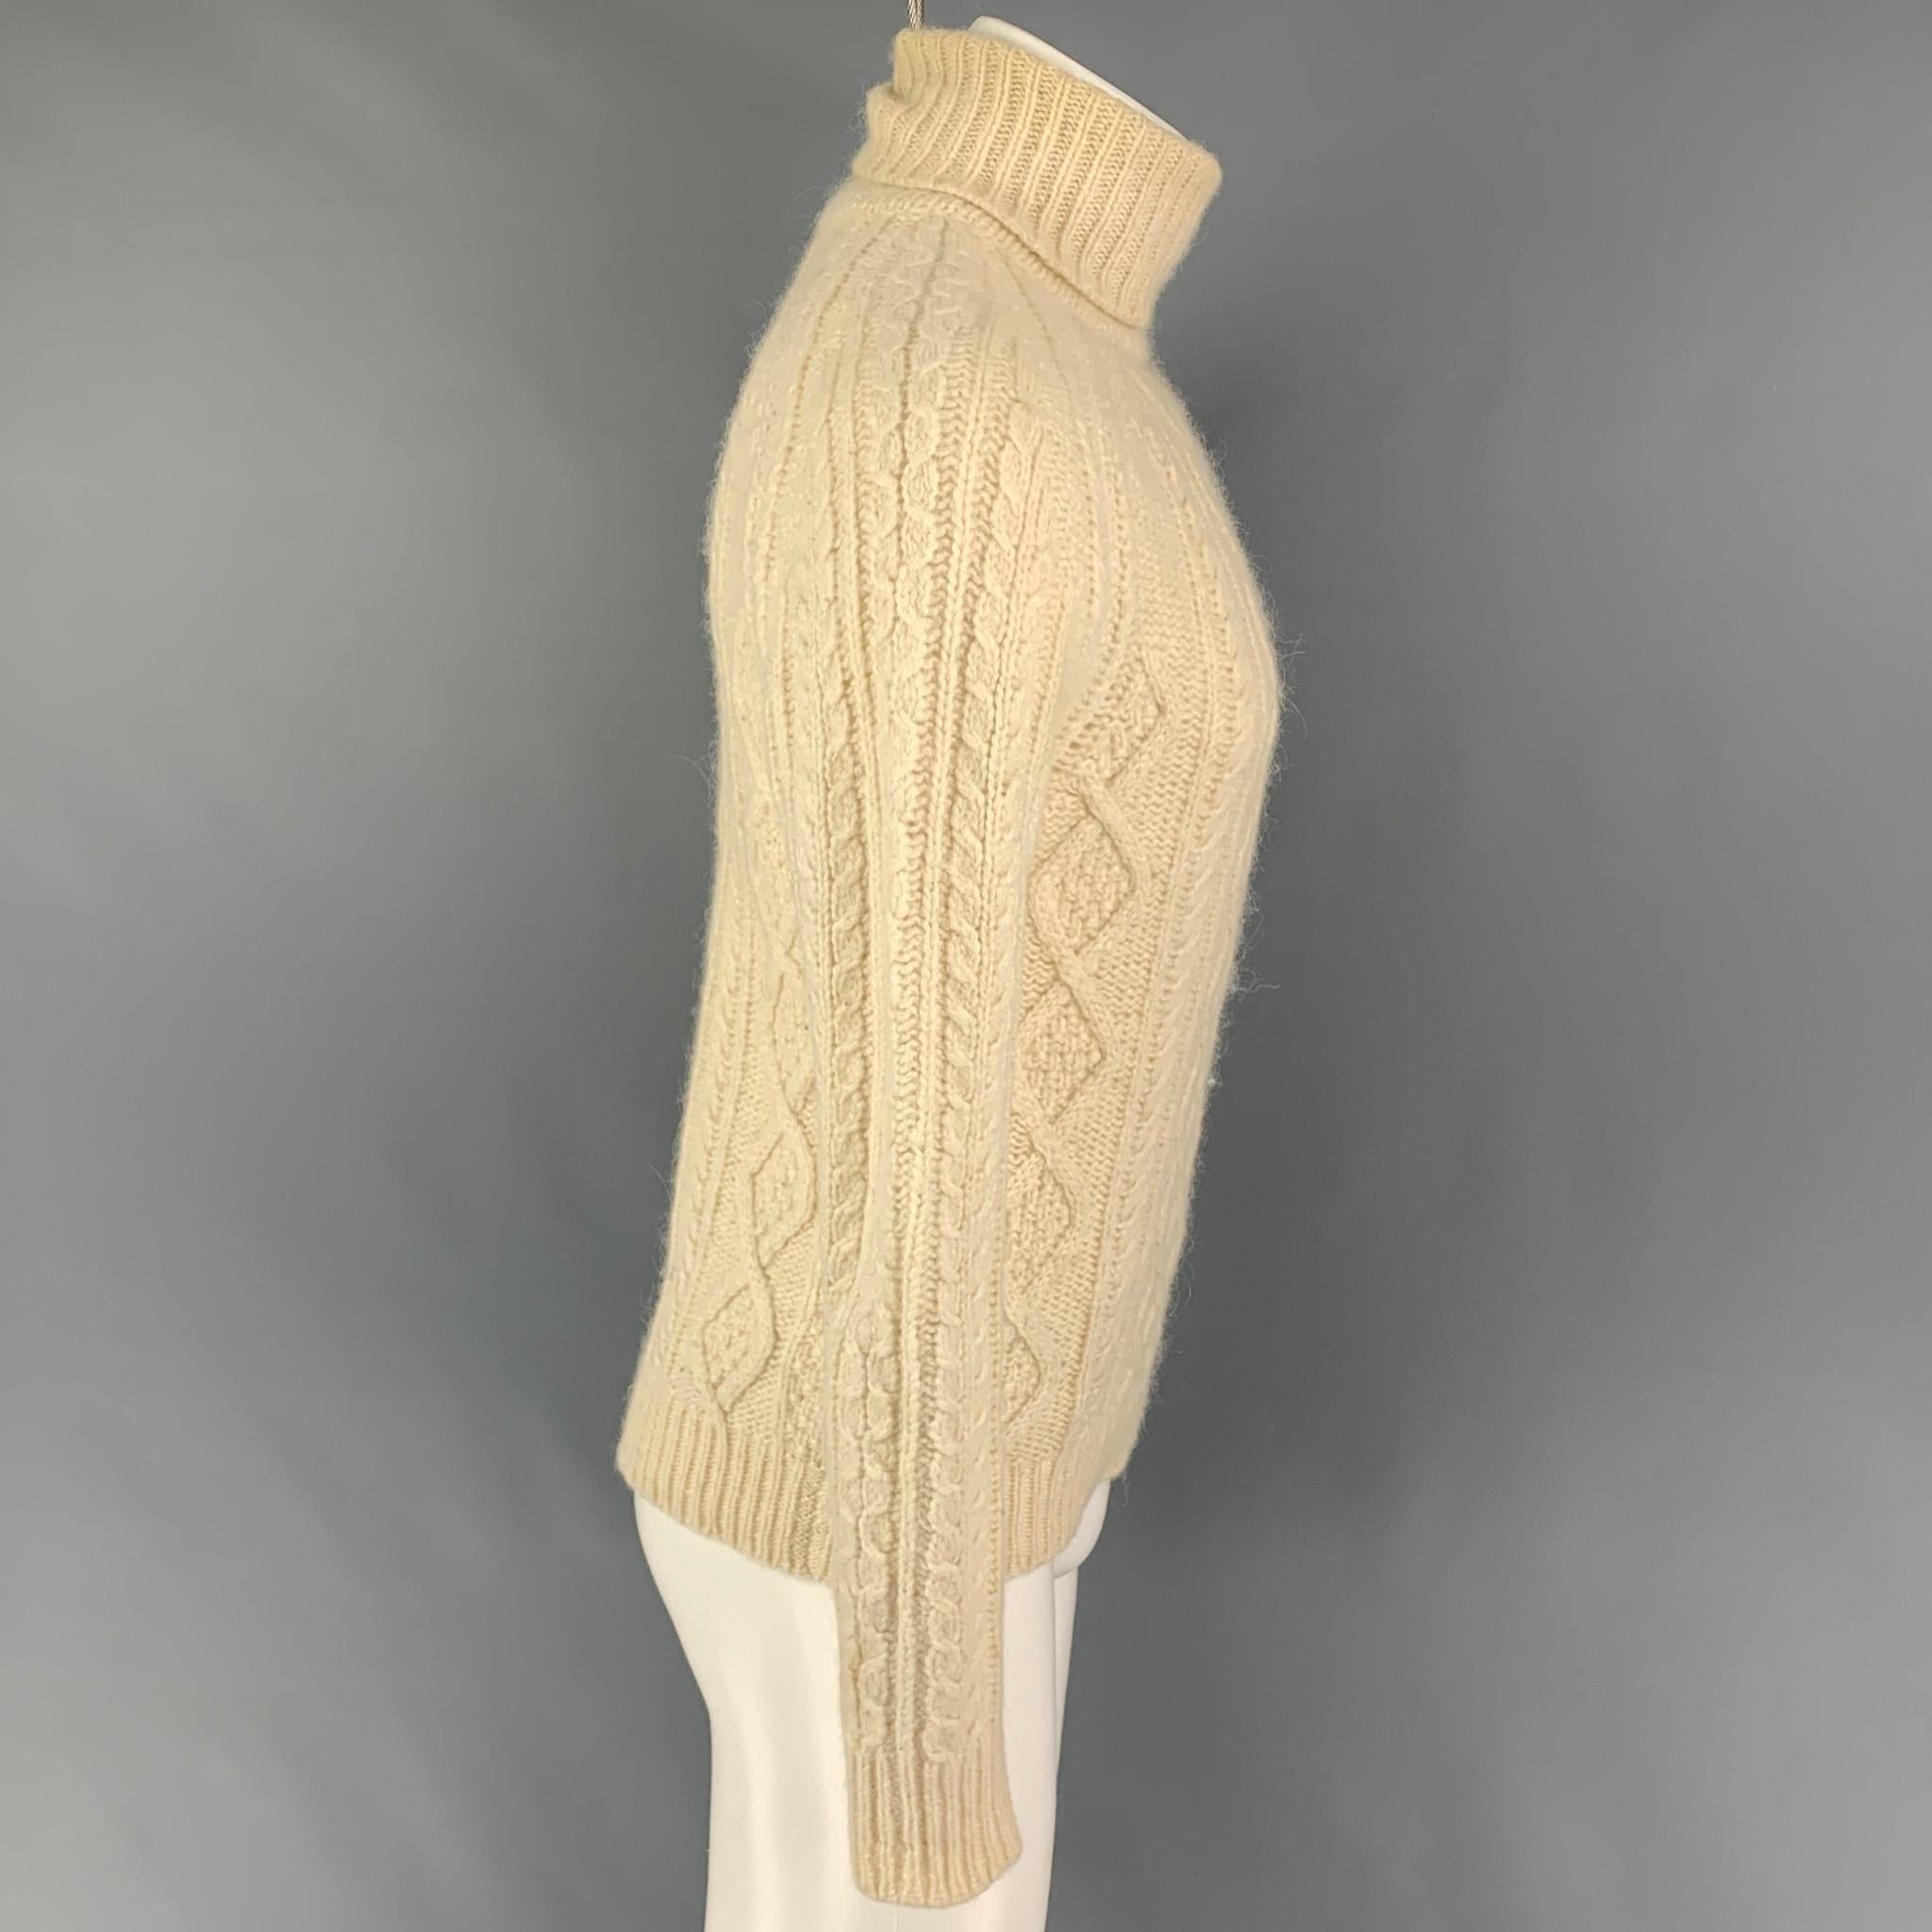 DIOR HOMME sweater comes in a cream knit alpaca blend featuring a turtleneck. Made in Italy. 

Very Good Pre-Owned Condition.
Marked: S

Measurements:

Shoulder: 17 in.
Chest: 36 in.
Sleeve: 25 in.
Length: 23.5 in. 